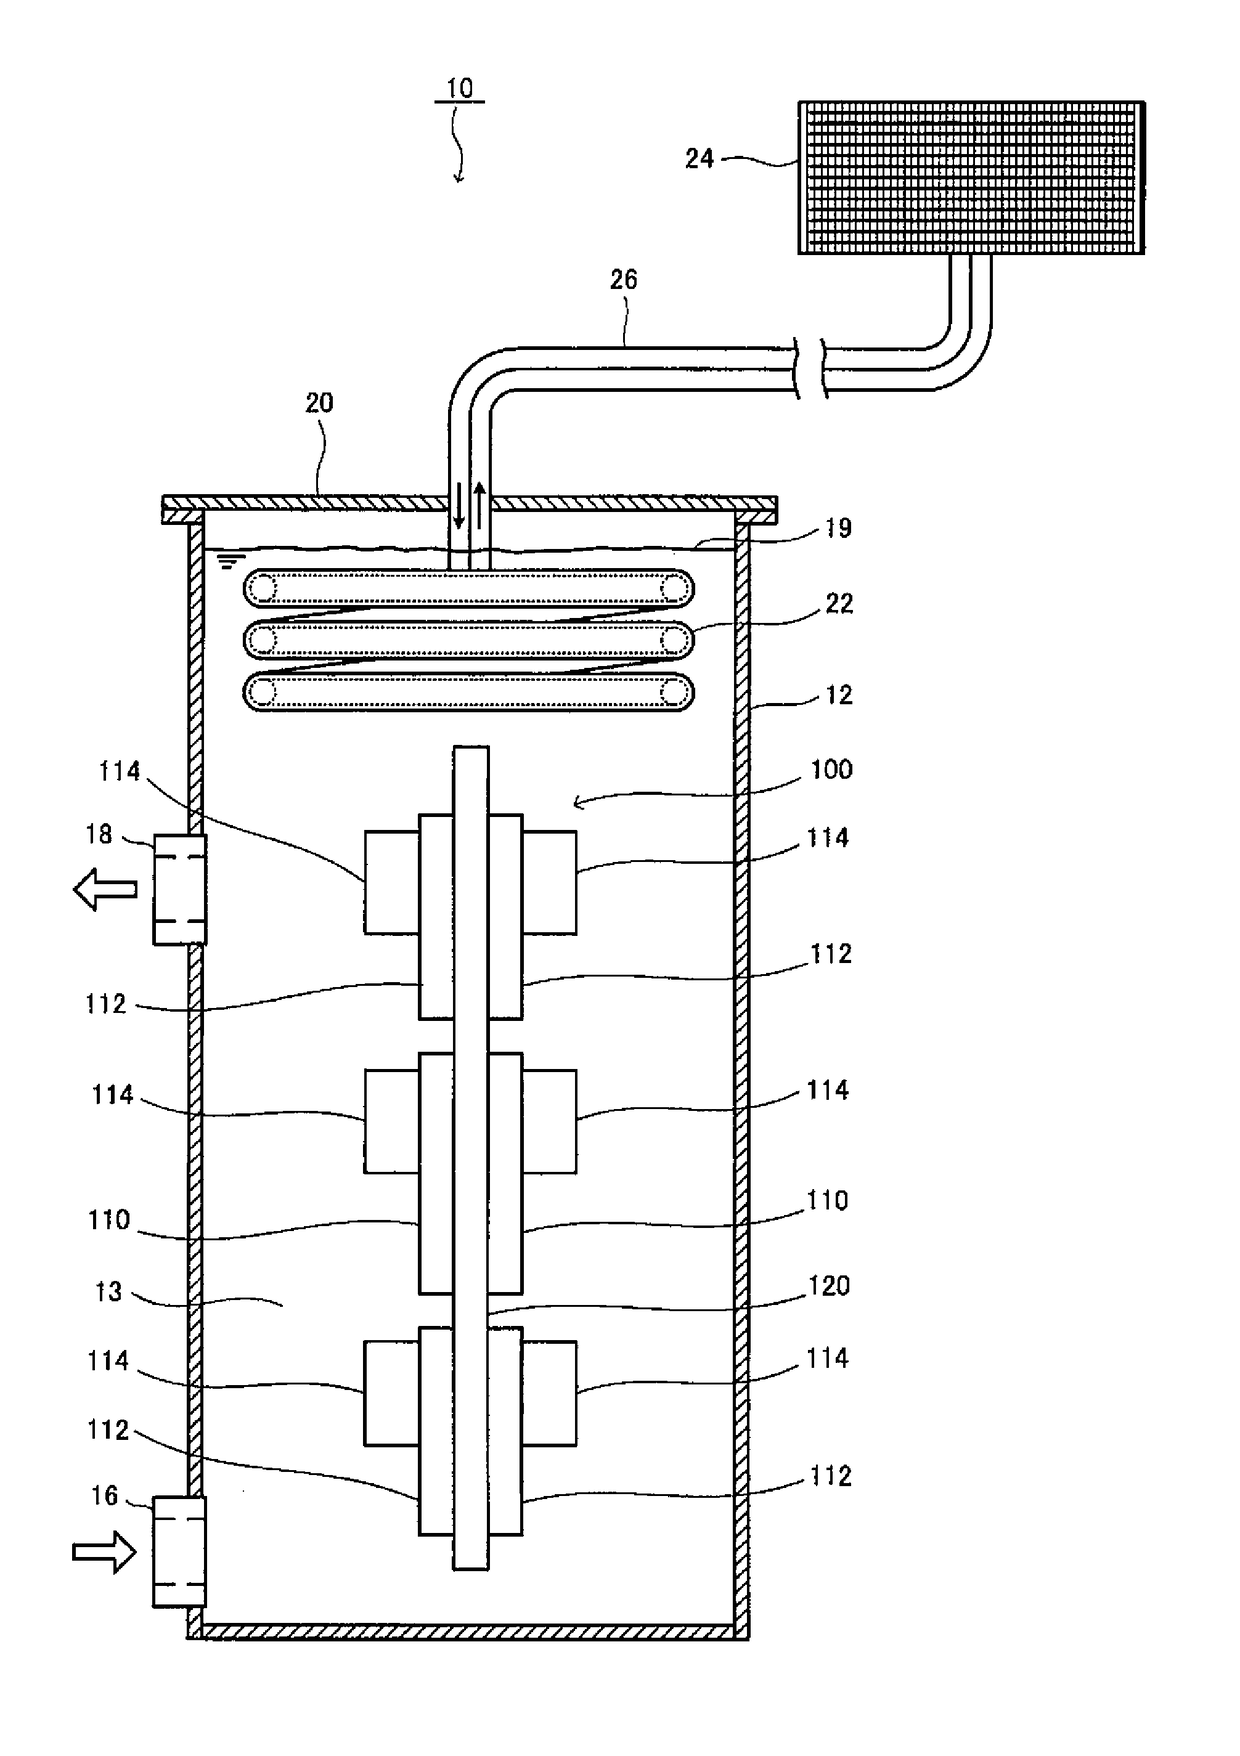 Electronic-device cooling system